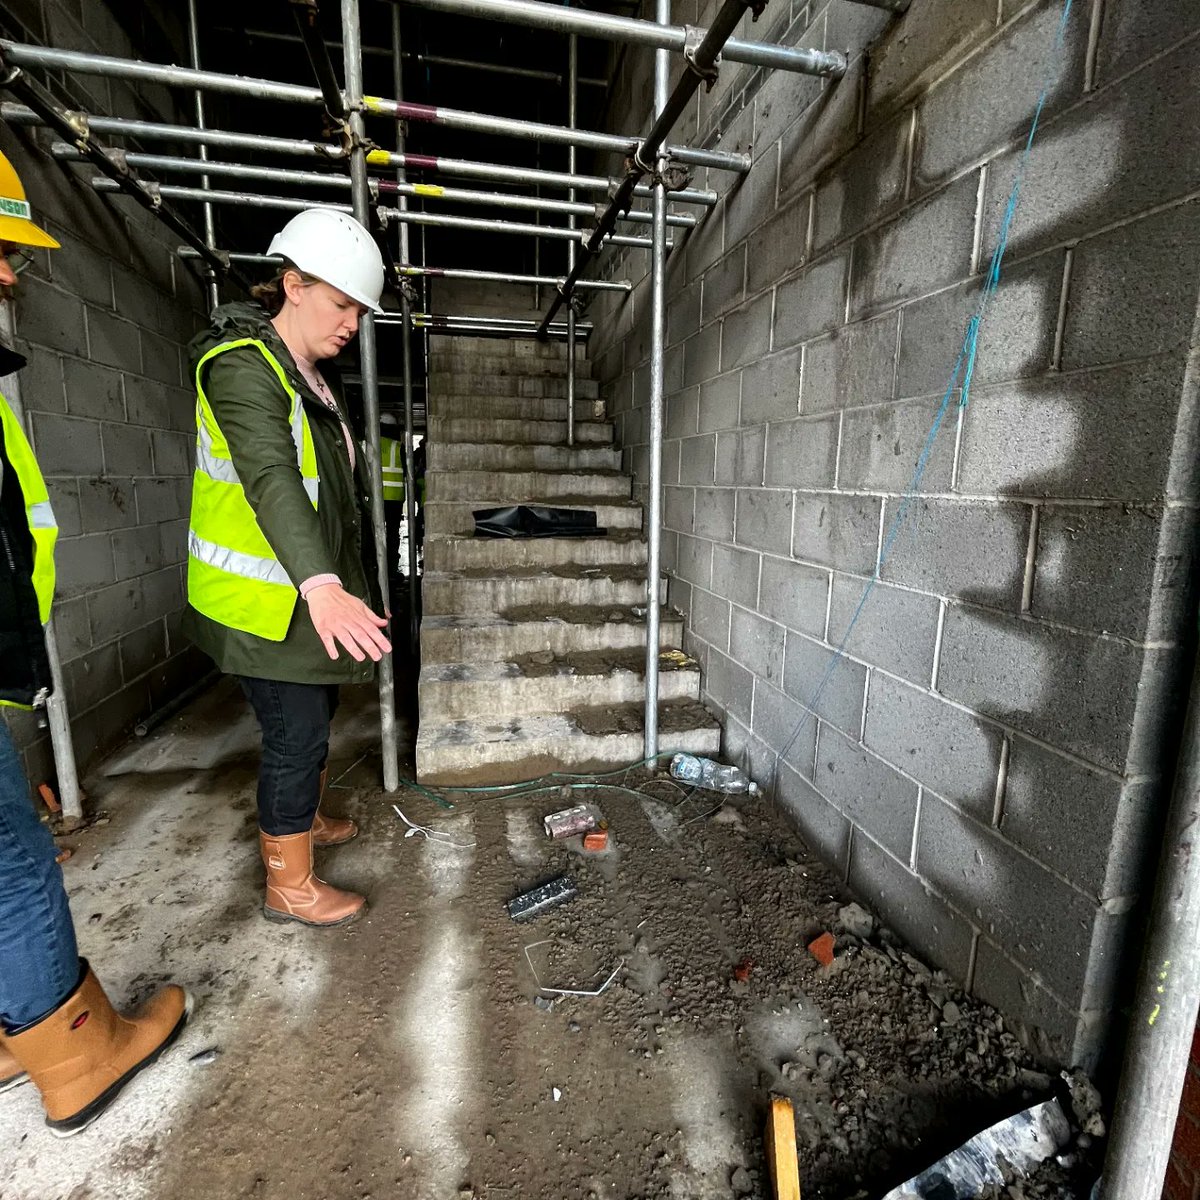 Visited Mornington Road in Preston this morning to see development on our exciting project with @buildingwithyou. Last time we visited the building was up to first floor, now the roof is on and first fix has been carried out on the ground floor. #preston #sitevisit